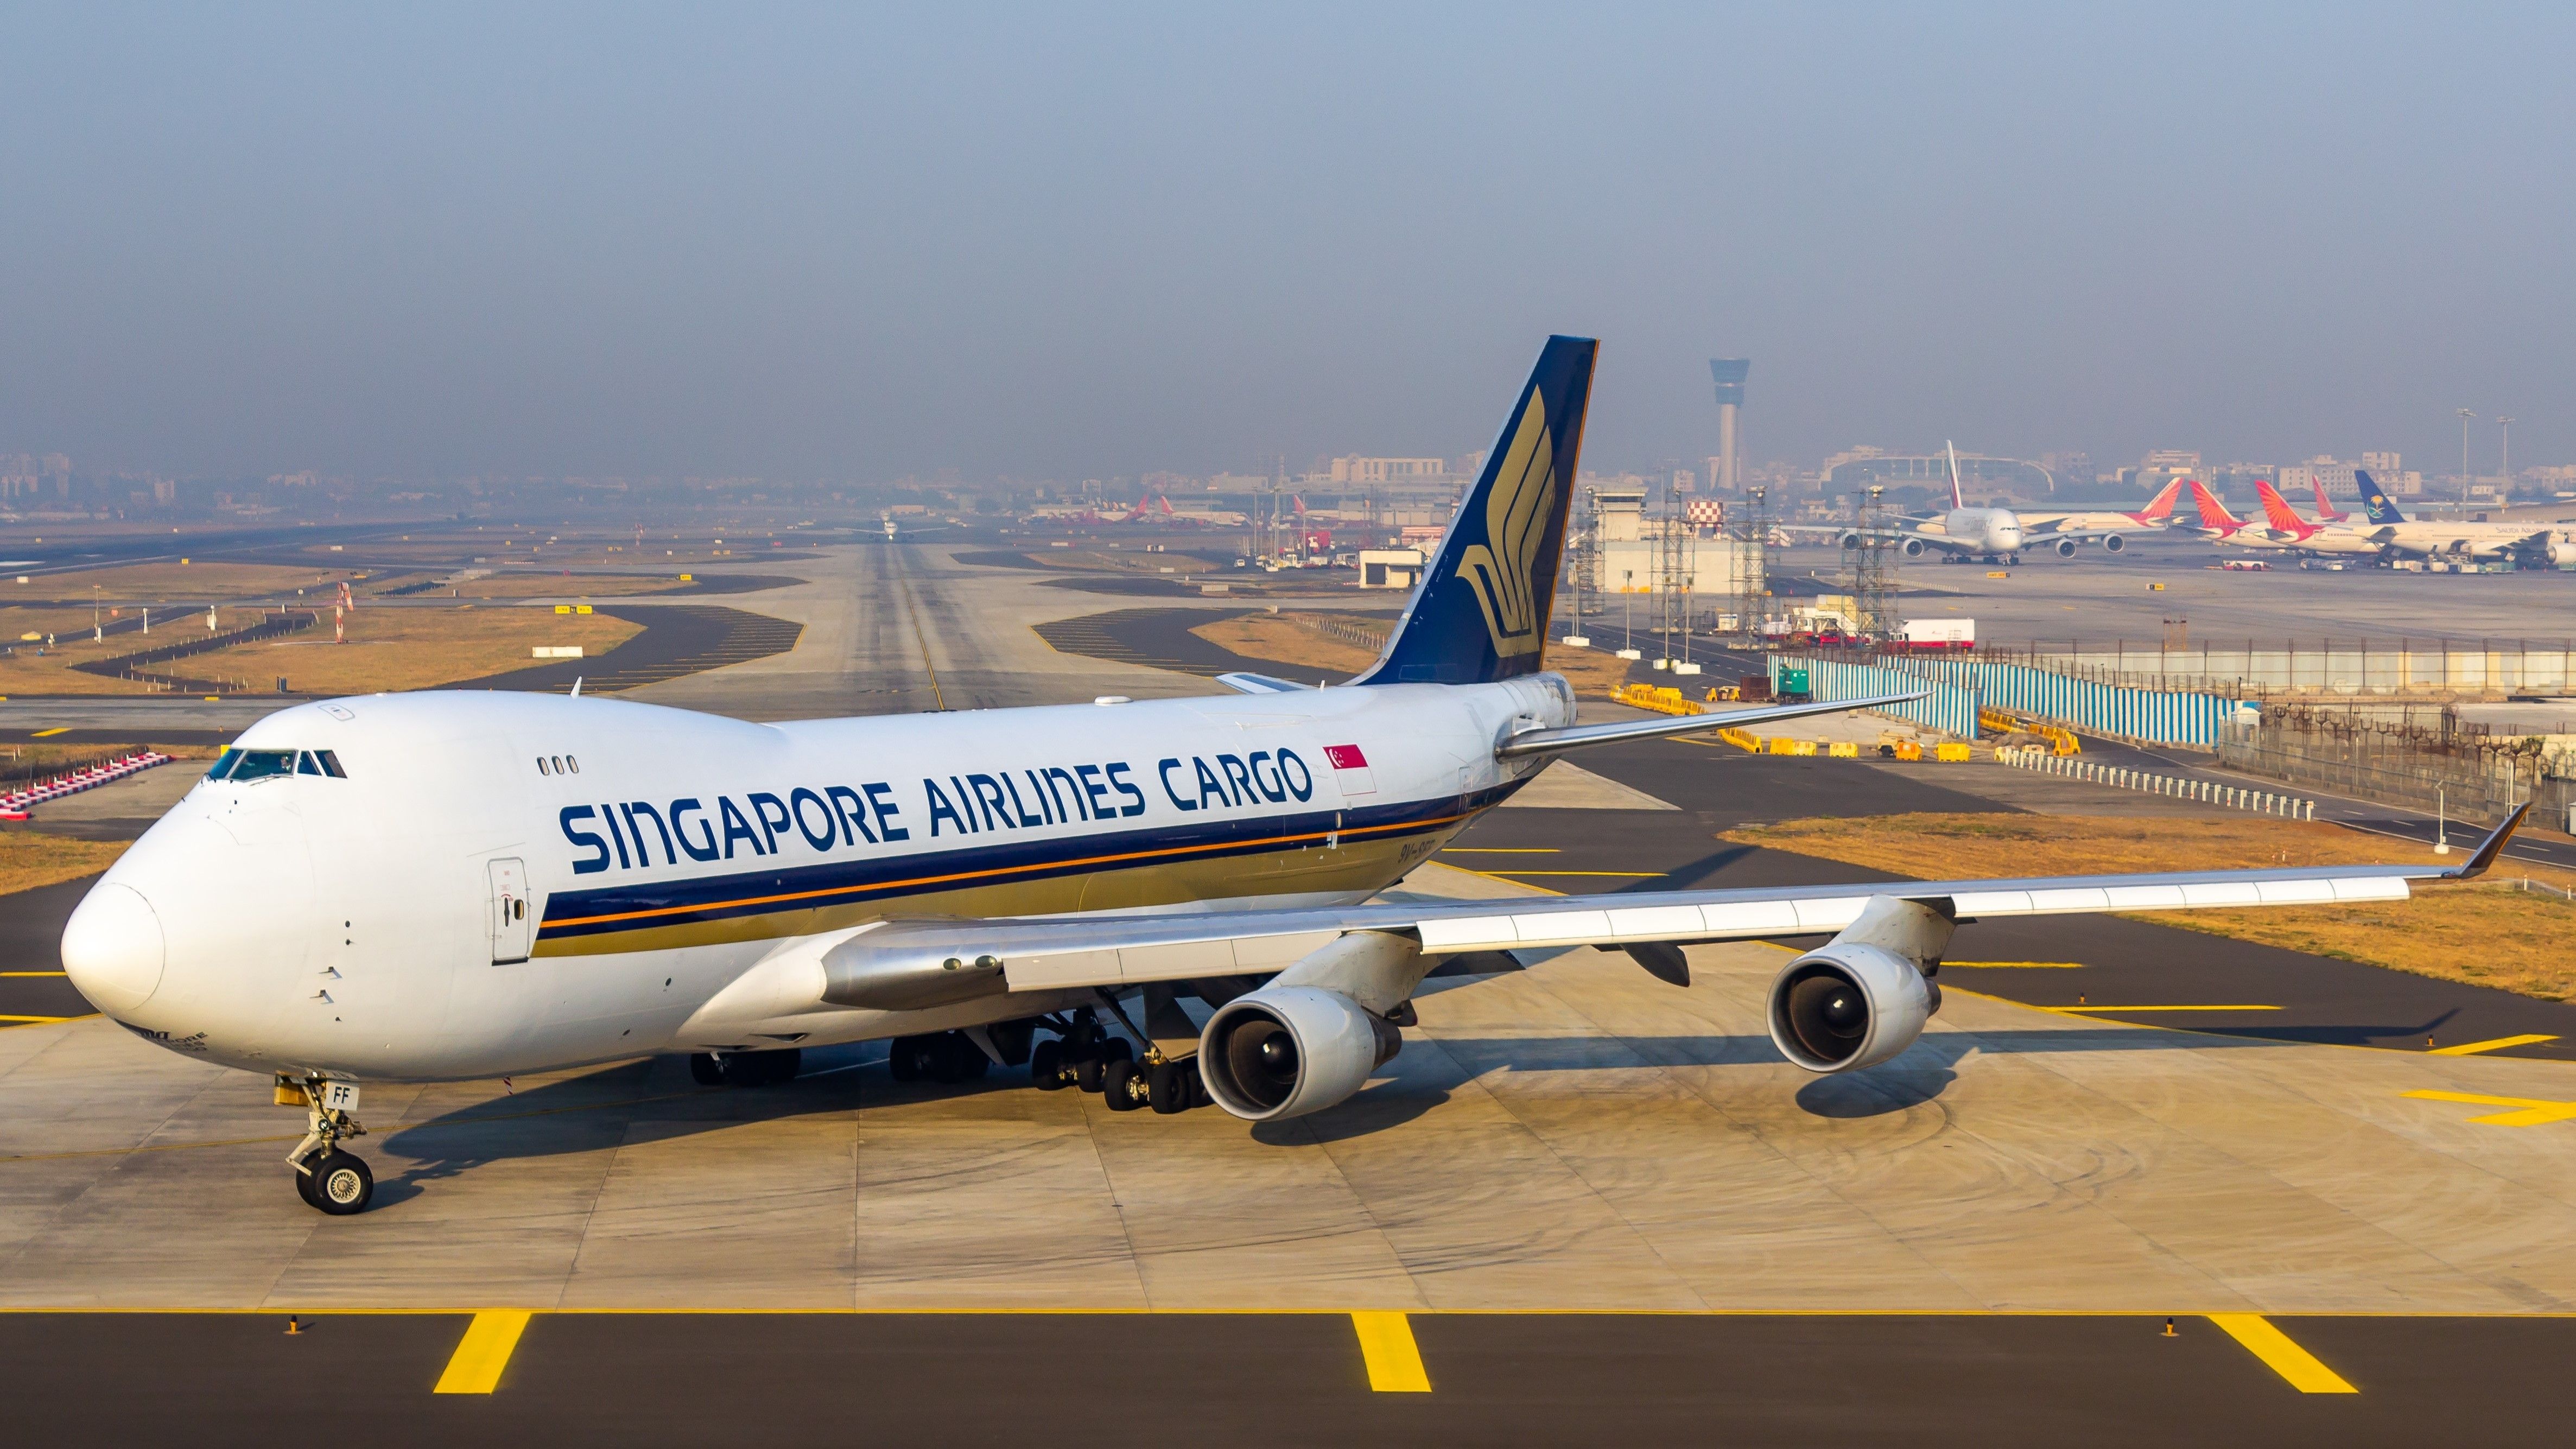 A Singapore Airlines Cargo Boeing 747-400F on an airport apron.